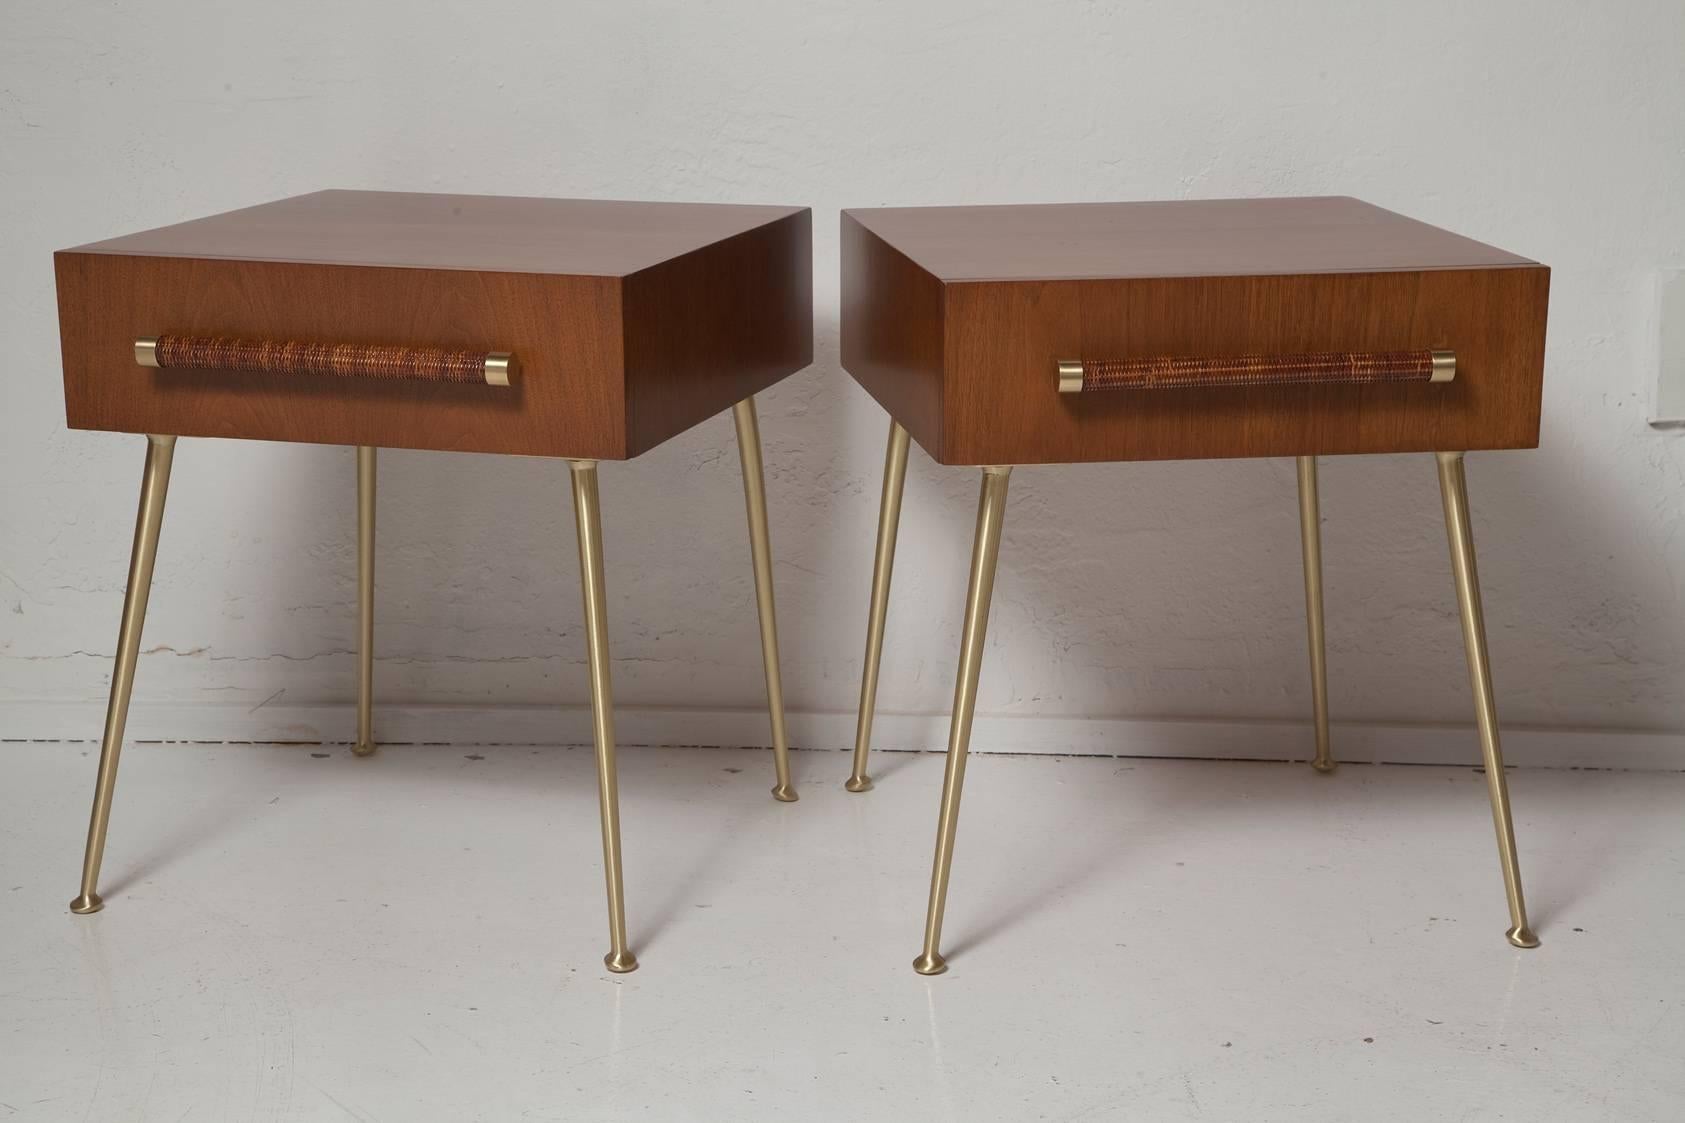 Designed by T.H. Robsjohn-Gibbings for Widdicomb Furniture Company, this rare pair of fully restored 1950s American walnut nightstands have cane wrapped handles and brushed brass legs and fittings. Fabric labels in both. Model no. 4001.